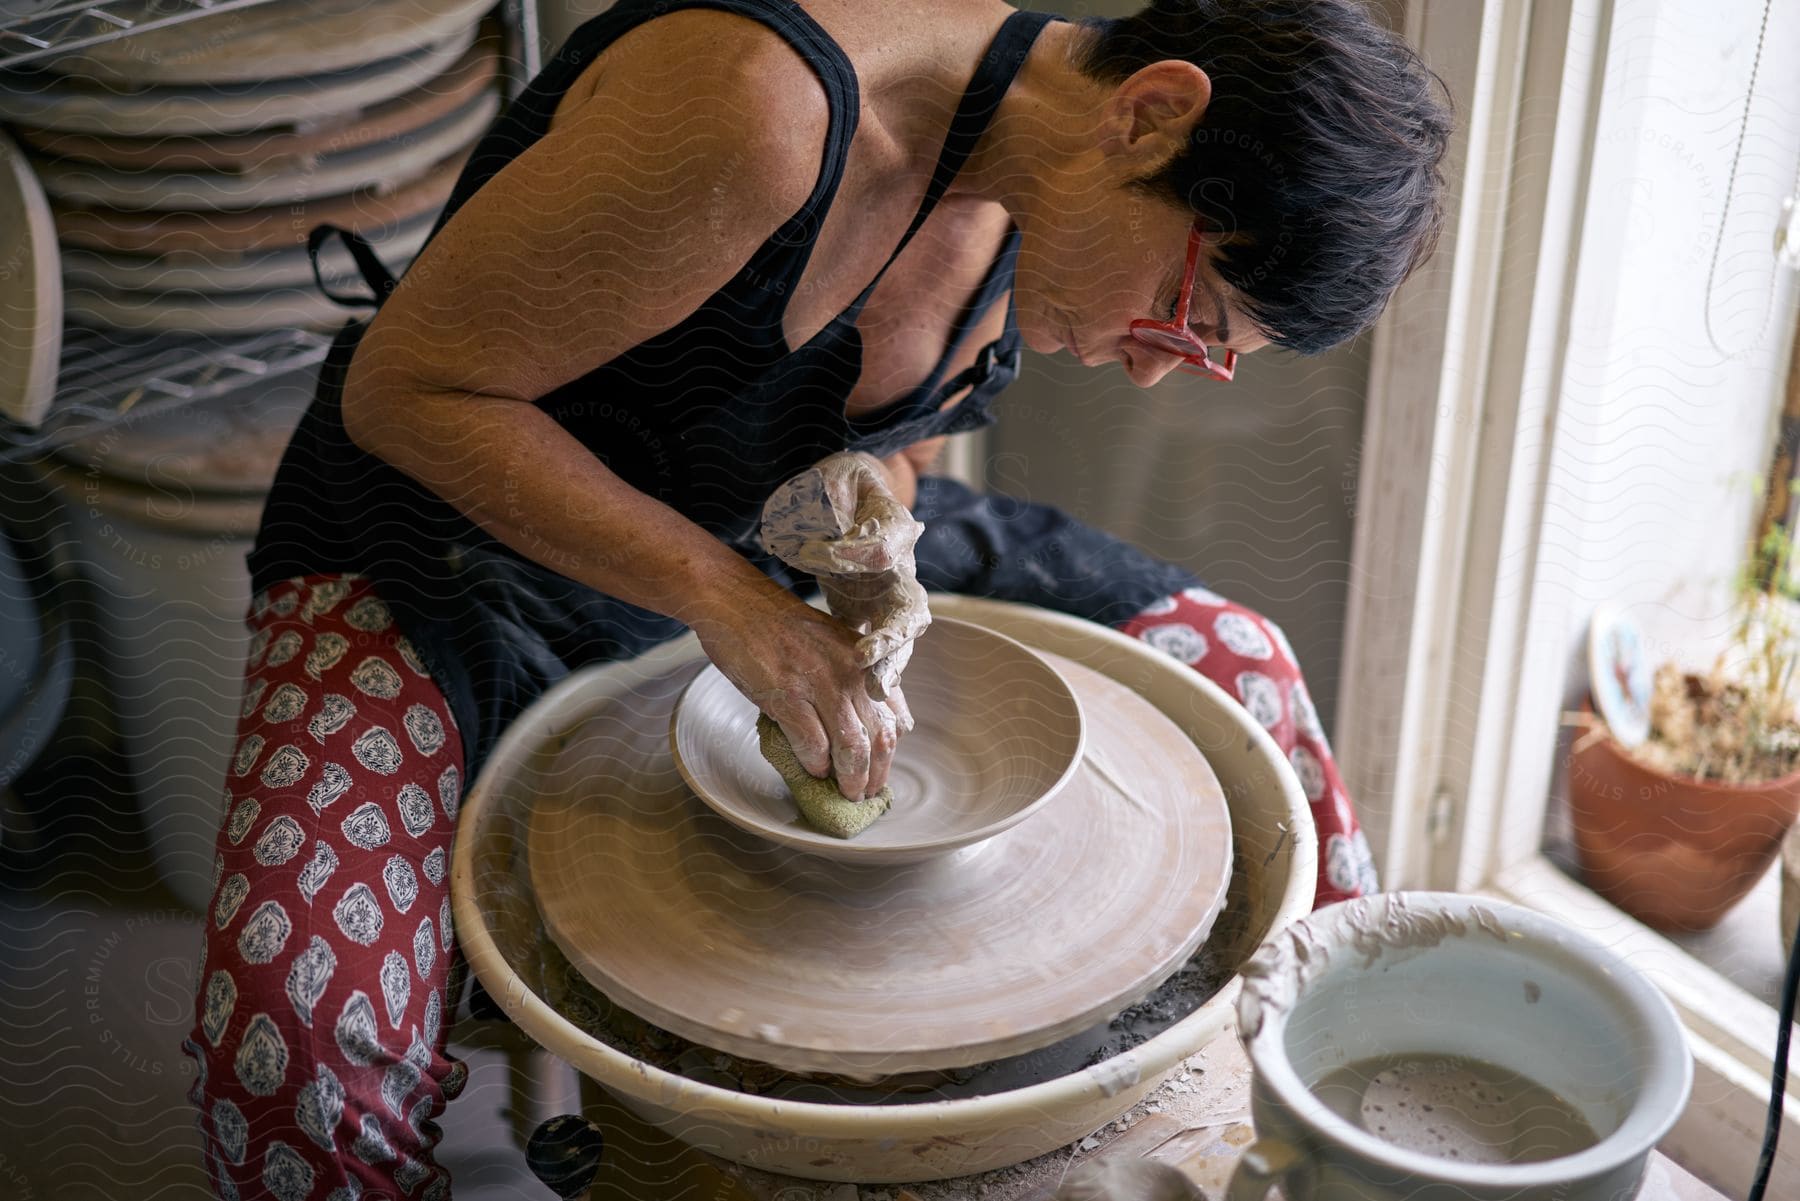 Man working with clay making a bowl on a pottery wheel